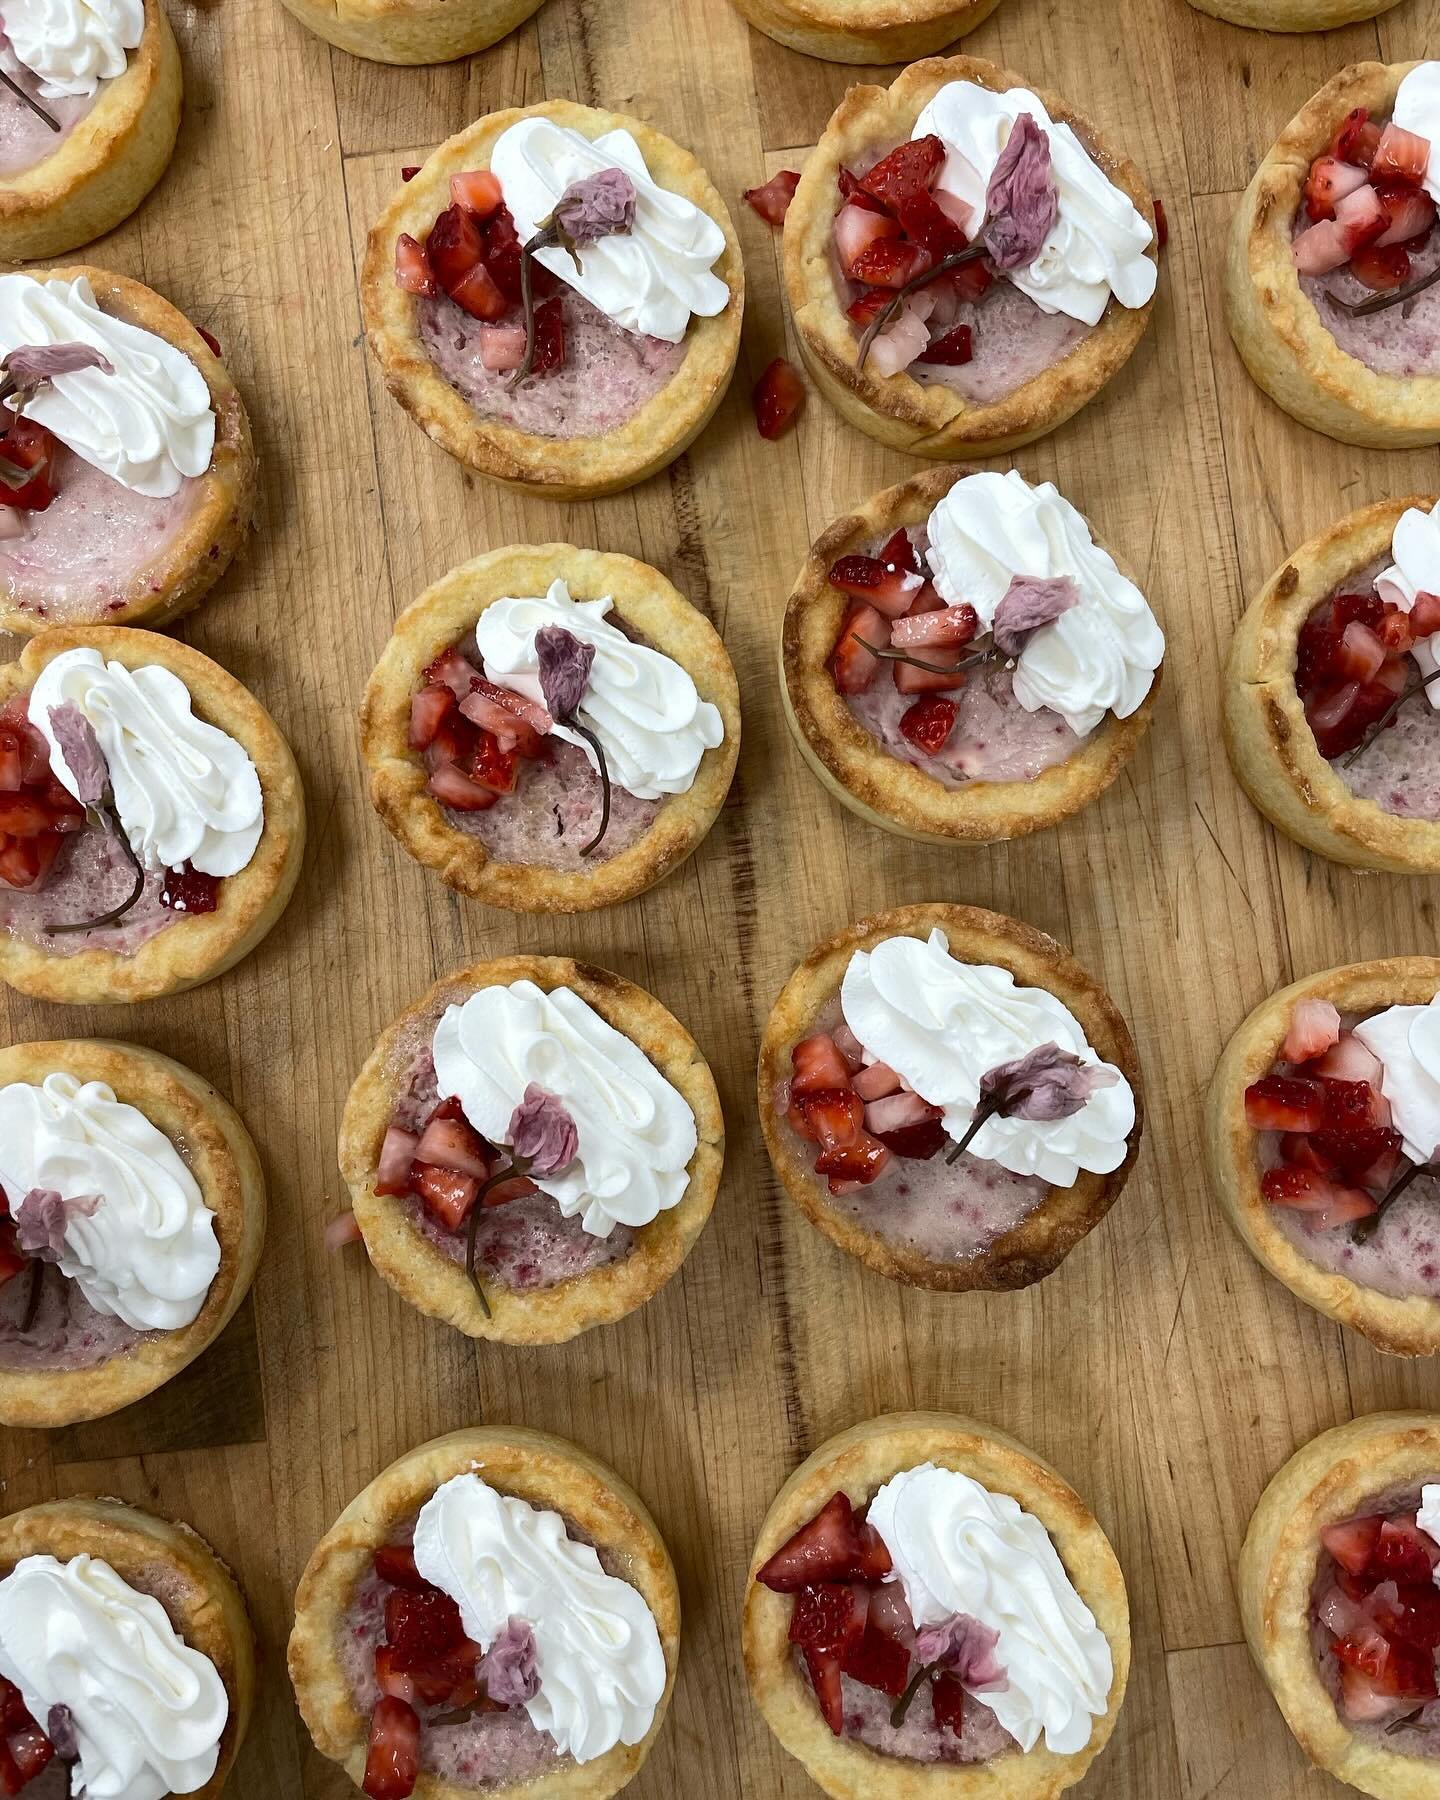 New stuff @central9thmarket this weekend! Strawberry Cream Tarts available today. It&rsquo;s a strawberry sour cream custard with vanilla whip and a pickled sakura blossom all the way from Japan. The blossom tastes a little salty and floral with a to